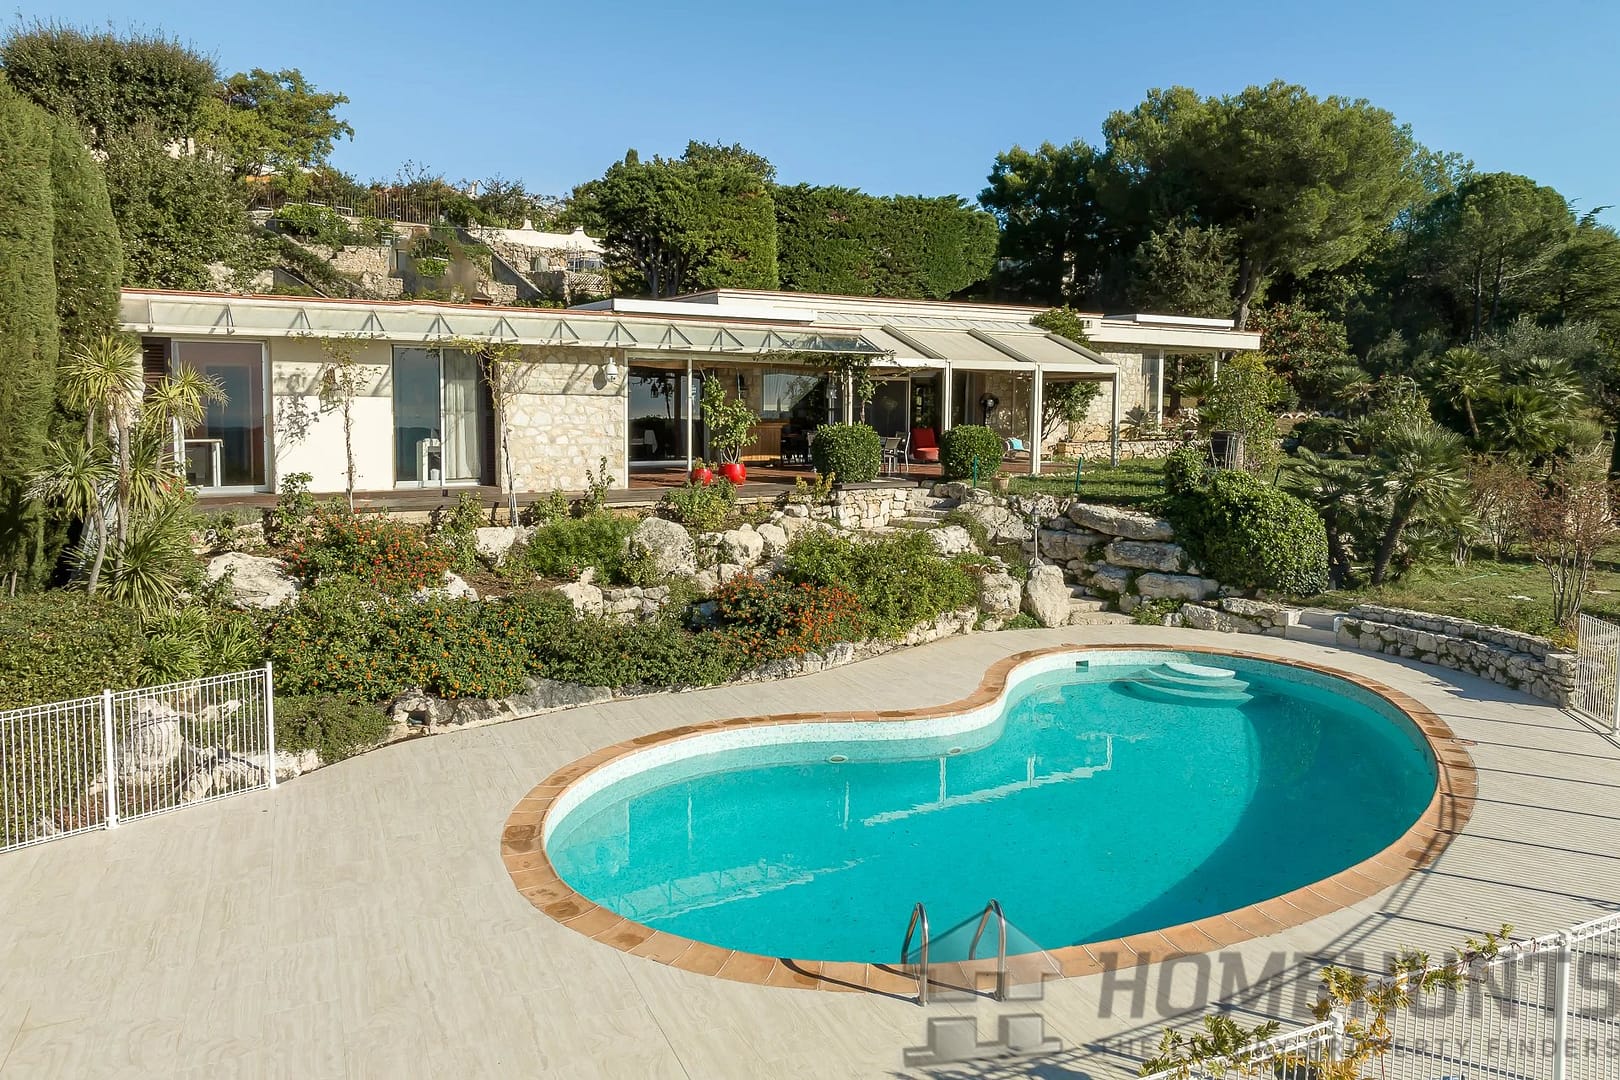 4 Bedroom Villa/House in Chateauneuf Grasse 5